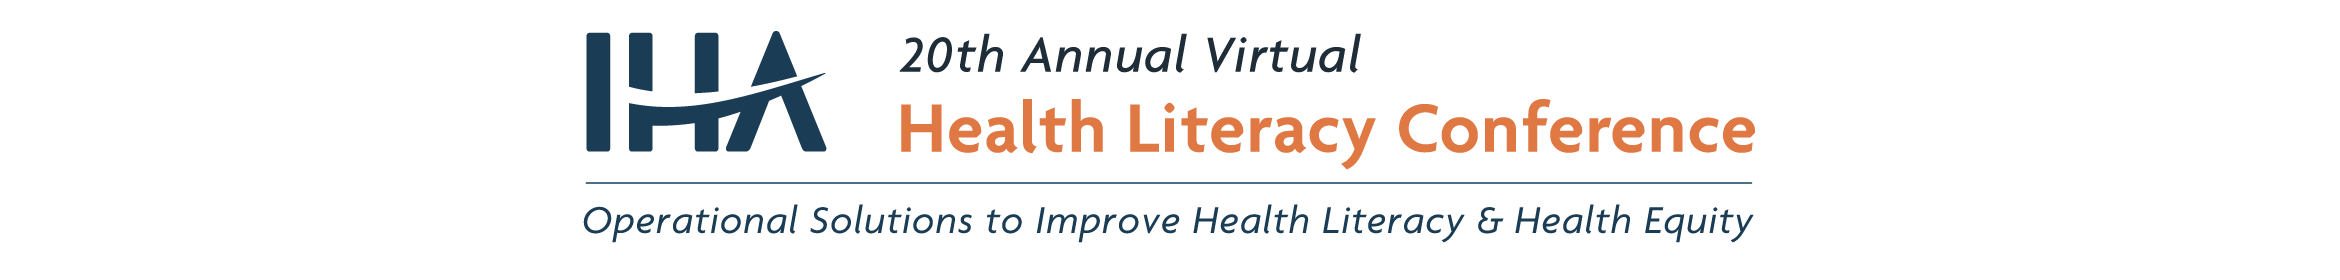 IHA's 20th Annual Health Literacy Conference Main banner